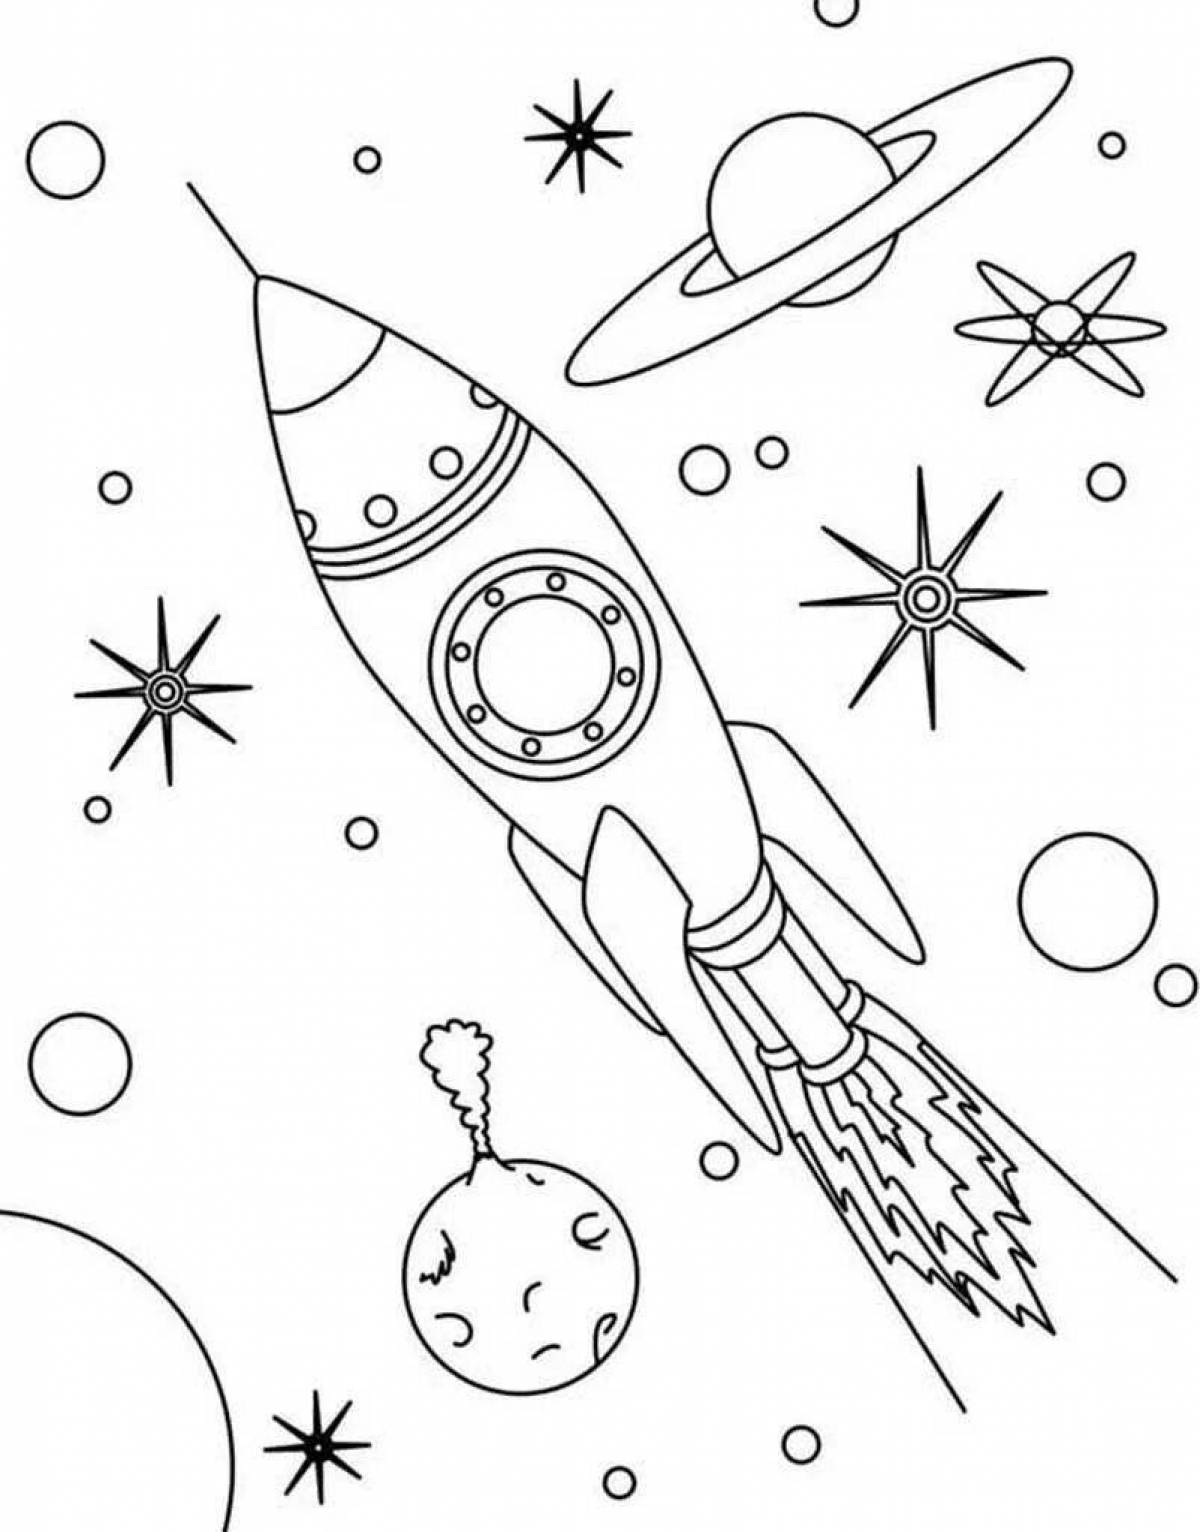 Great rocket coloring book for 4-5 year olds